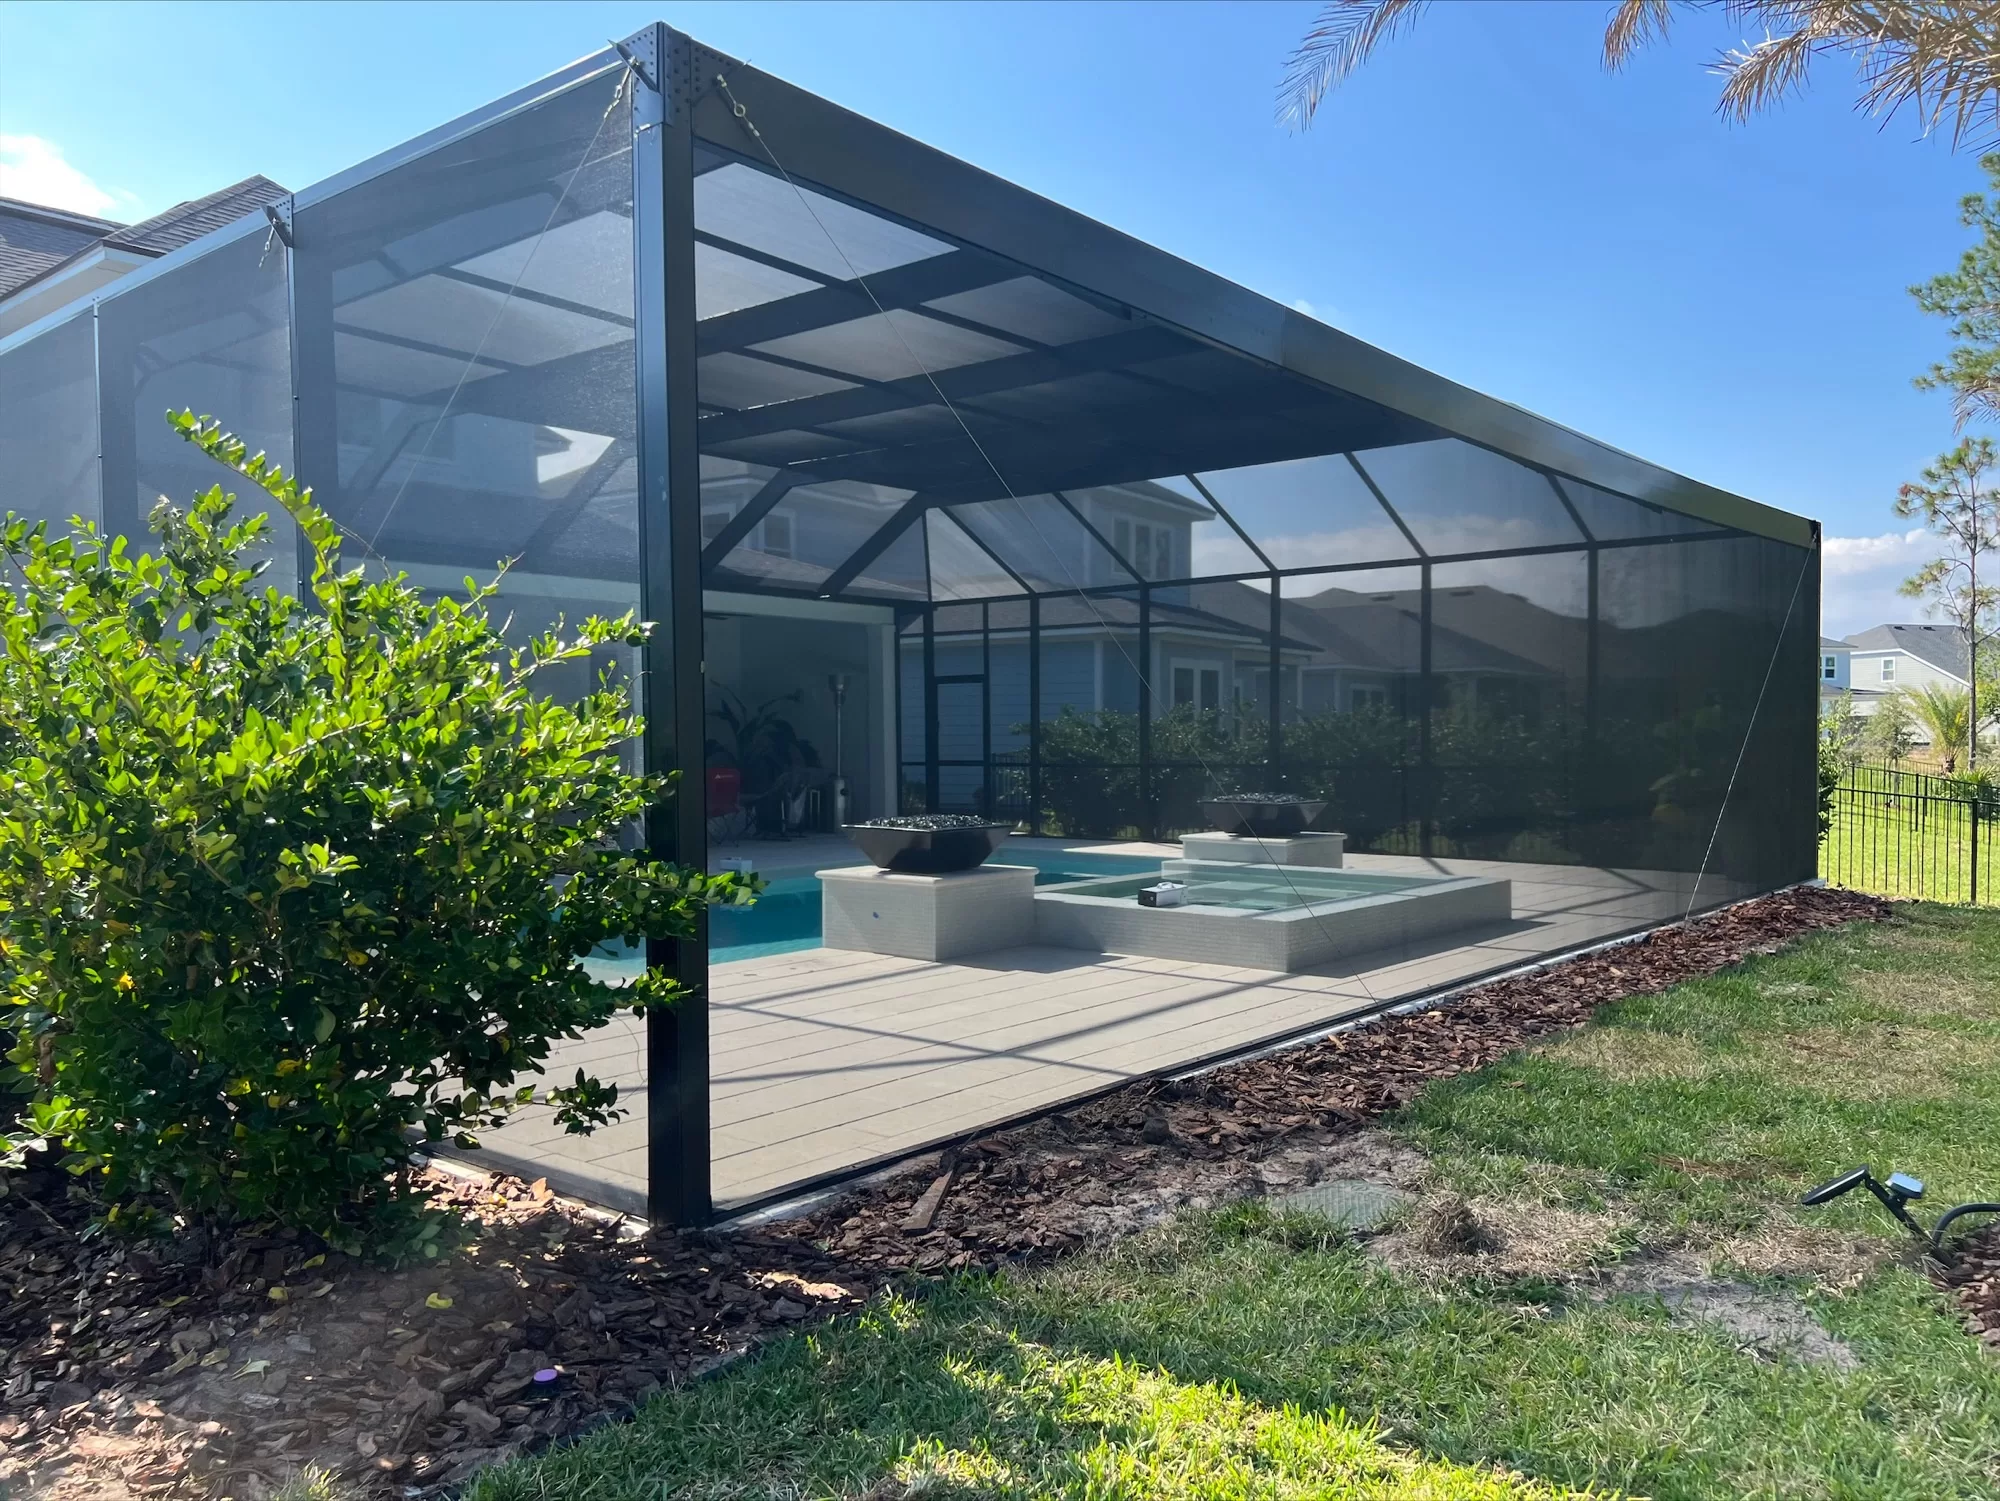 A freshly cleaned and treated pool that is protected by a screen enclosure built by Screen Enclosures and more in Jacksonville, Florida.